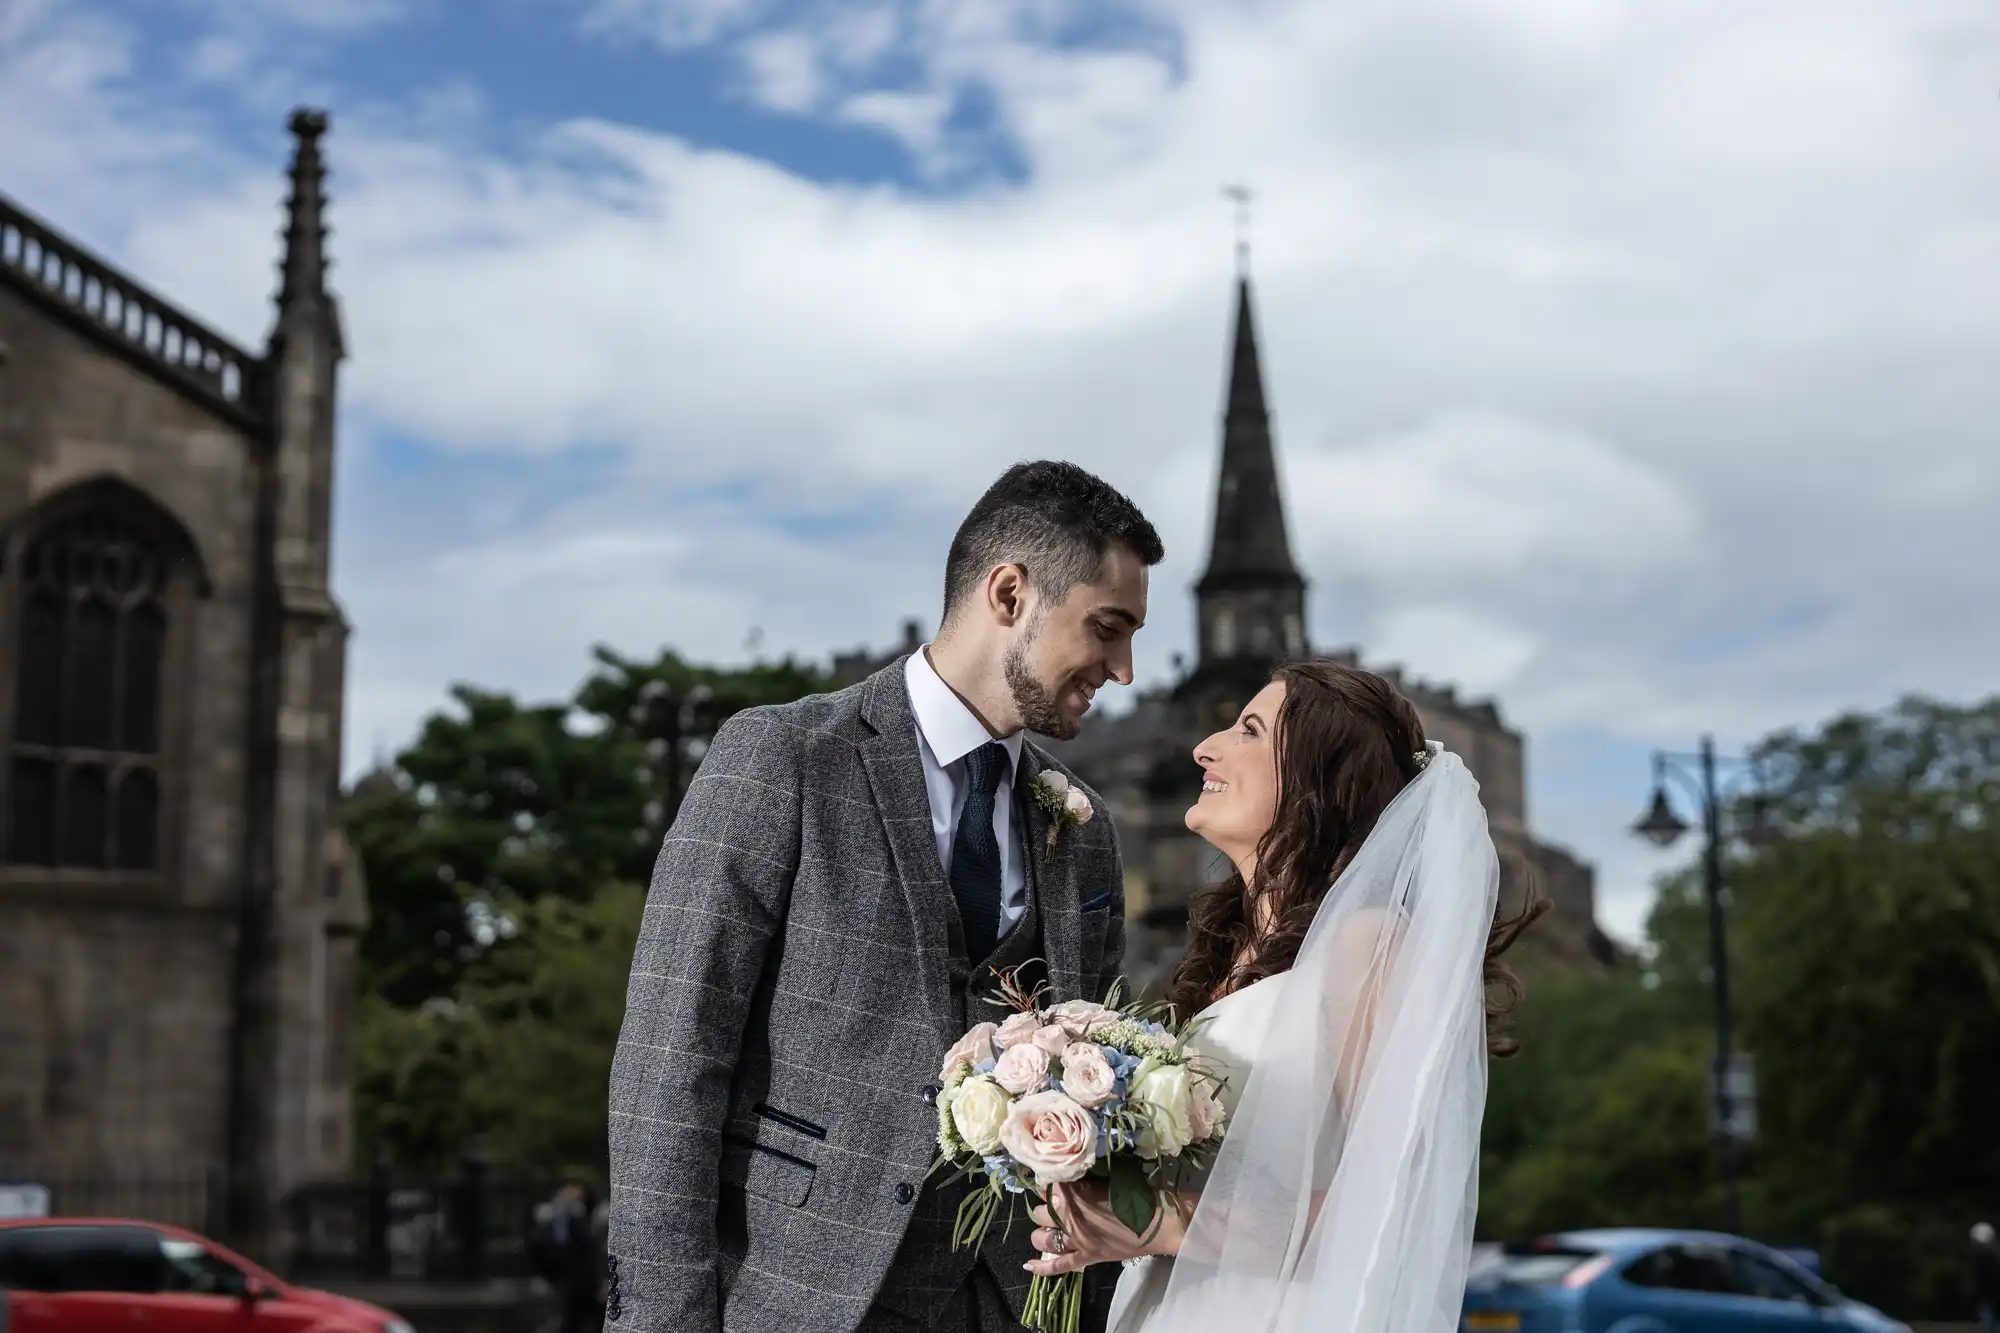 A newlywed couple gazes lovingly at each other outside, holding a bouquet, with a church and cloudy sky in the background.